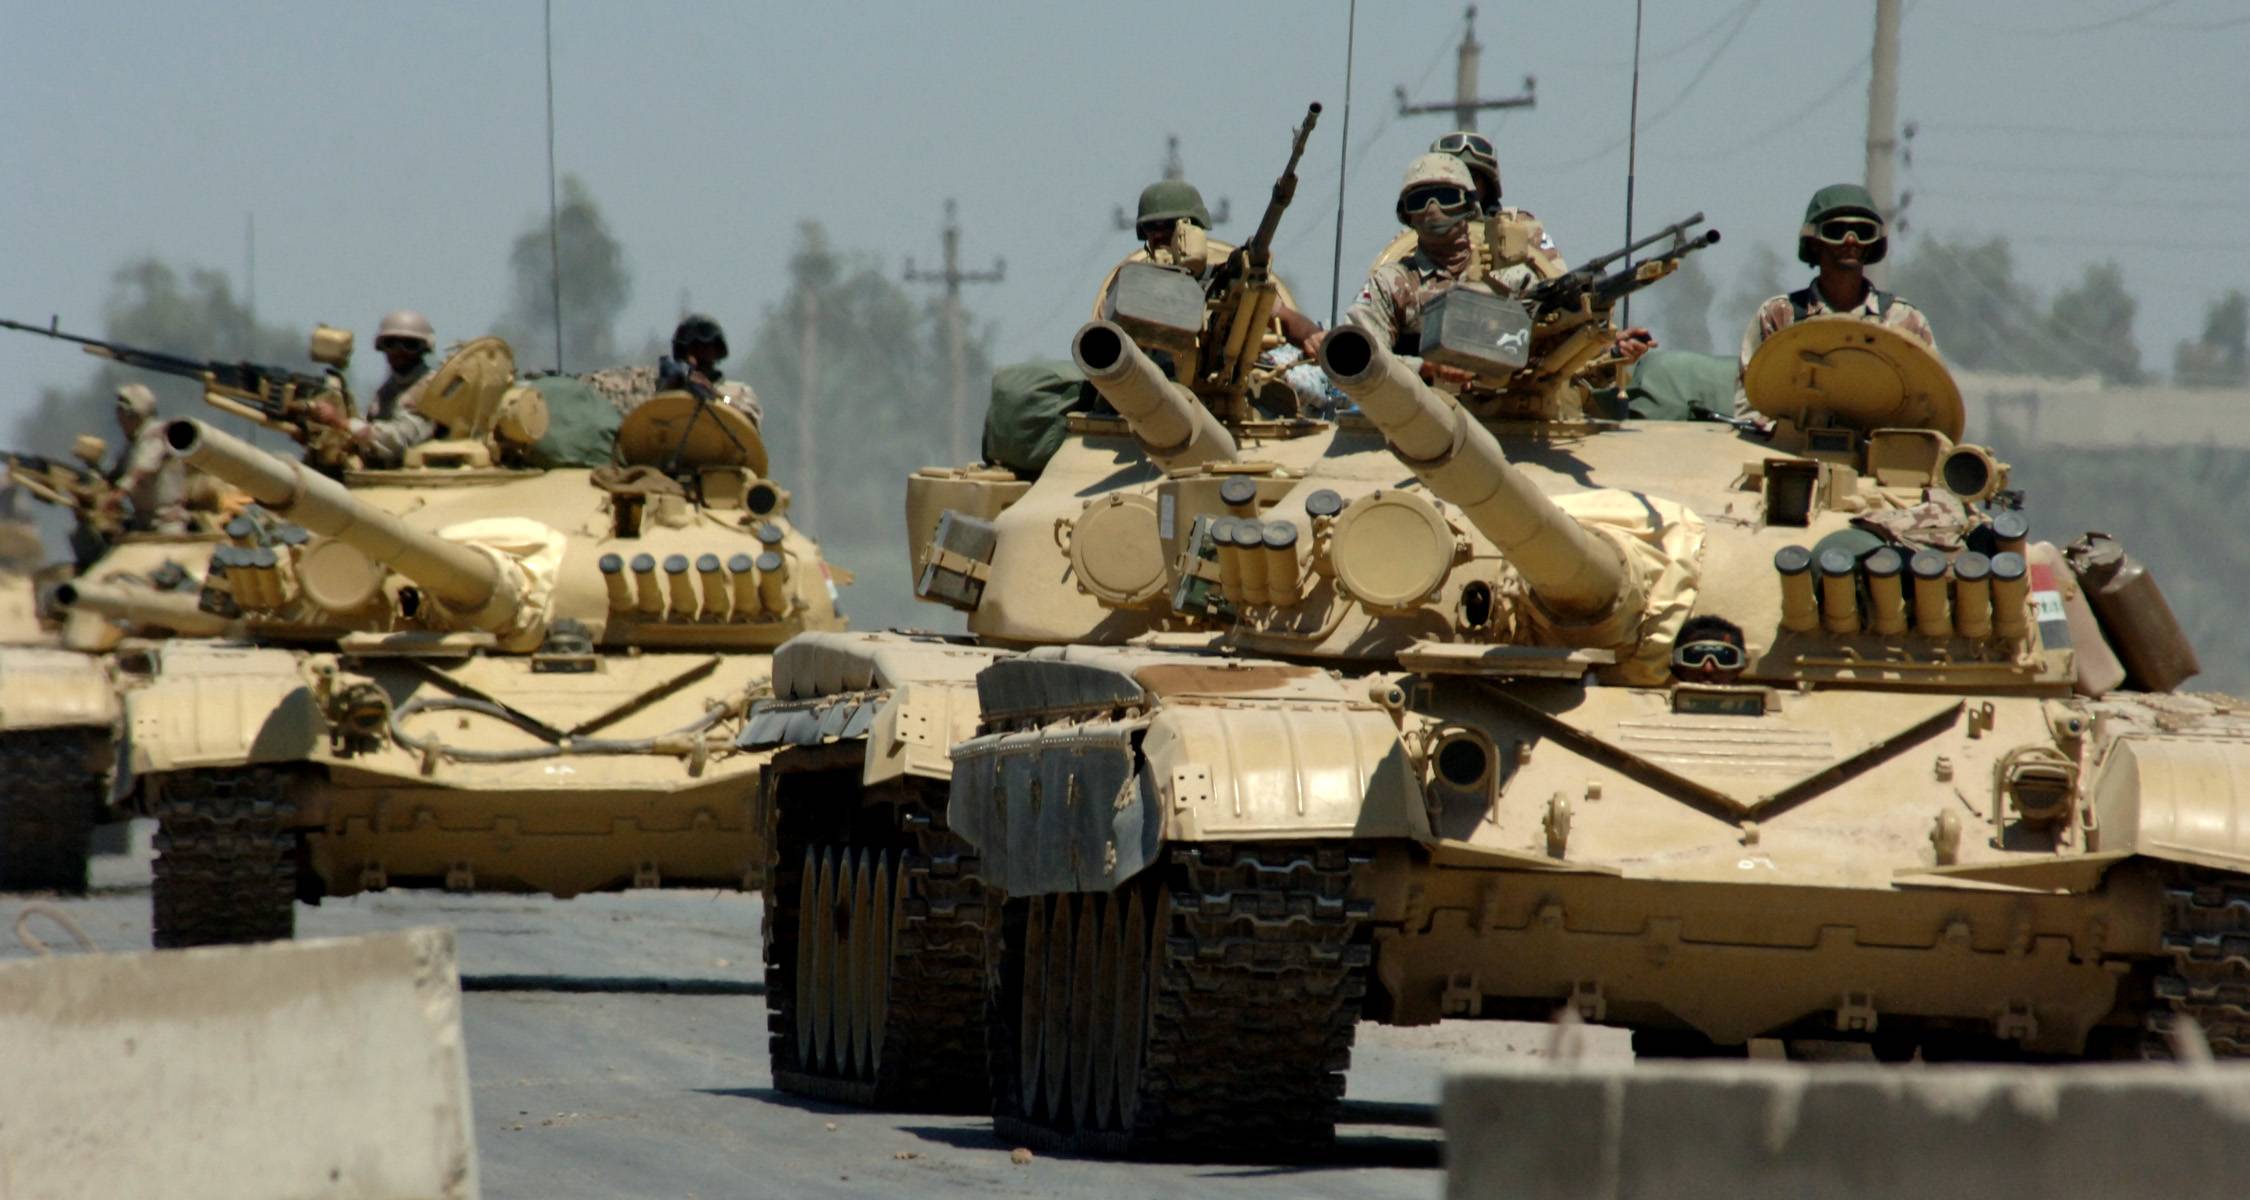 060518-N-6901L-005
Mushahda, Iraq (May 18, 2006) - 
Iraqi tanks assigned to the Iraqi Army 9th Mechanized Division drive through a checkpoint near Forward Operating Base Camp Taji, Iraq. U.S. Navy photo by Photographer's Mate 1st Class Michael Larson (RELEASED)